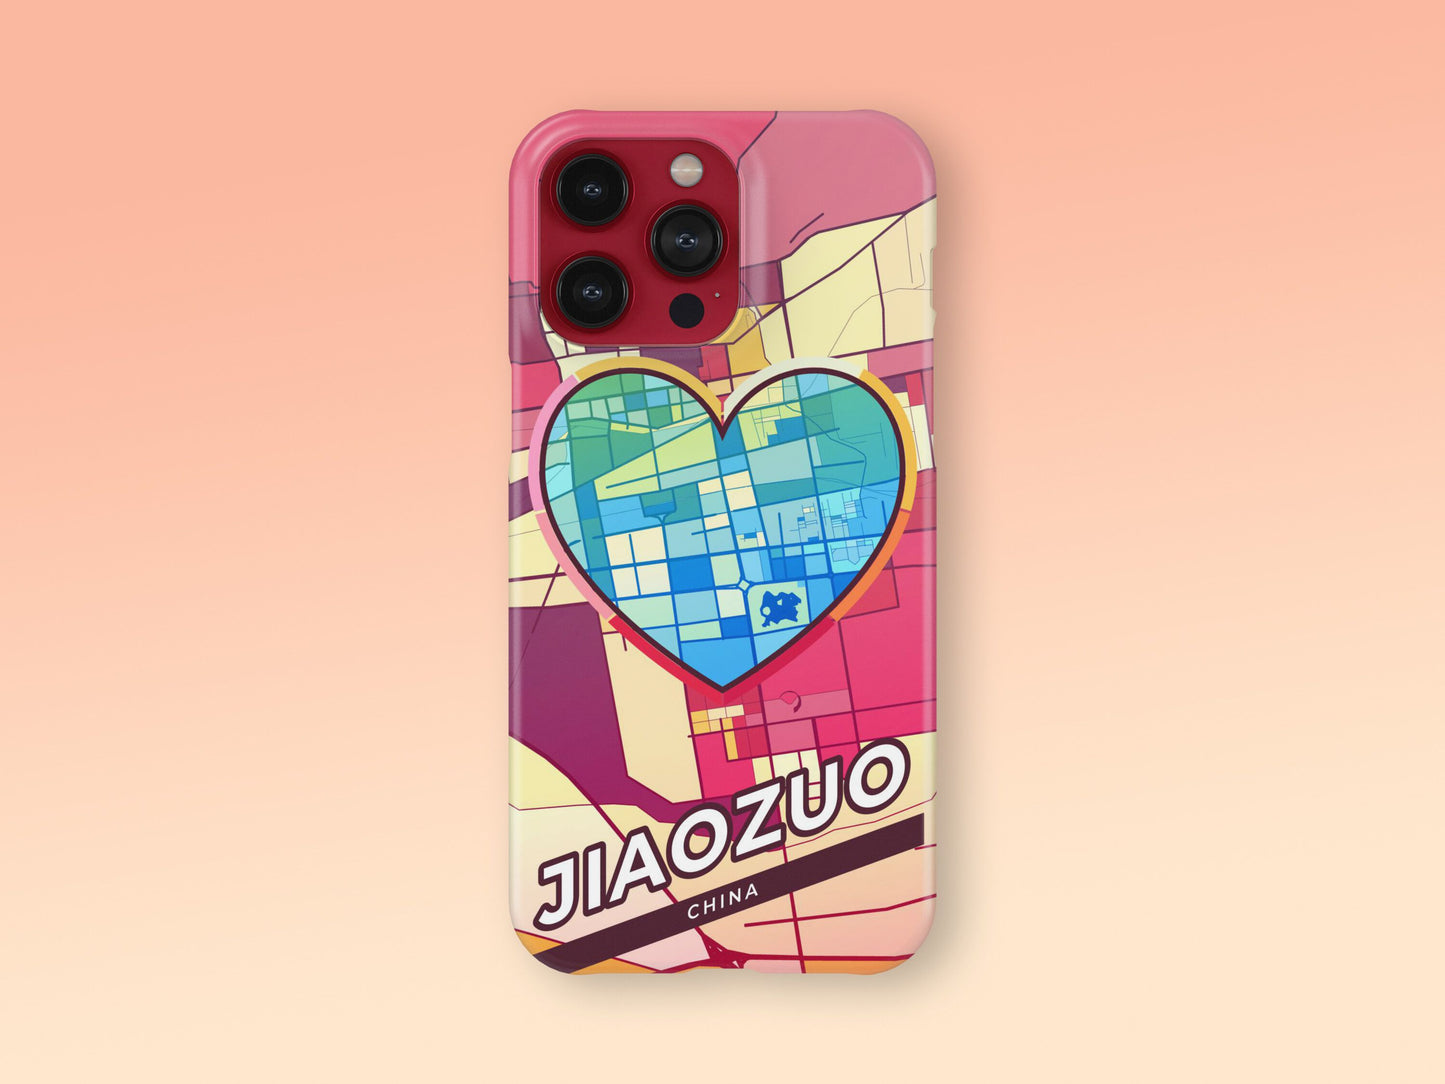 Jiaozuo China slim phone case with colorful icon. Birthday, wedding or housewarming gift. Couple match cases. 2